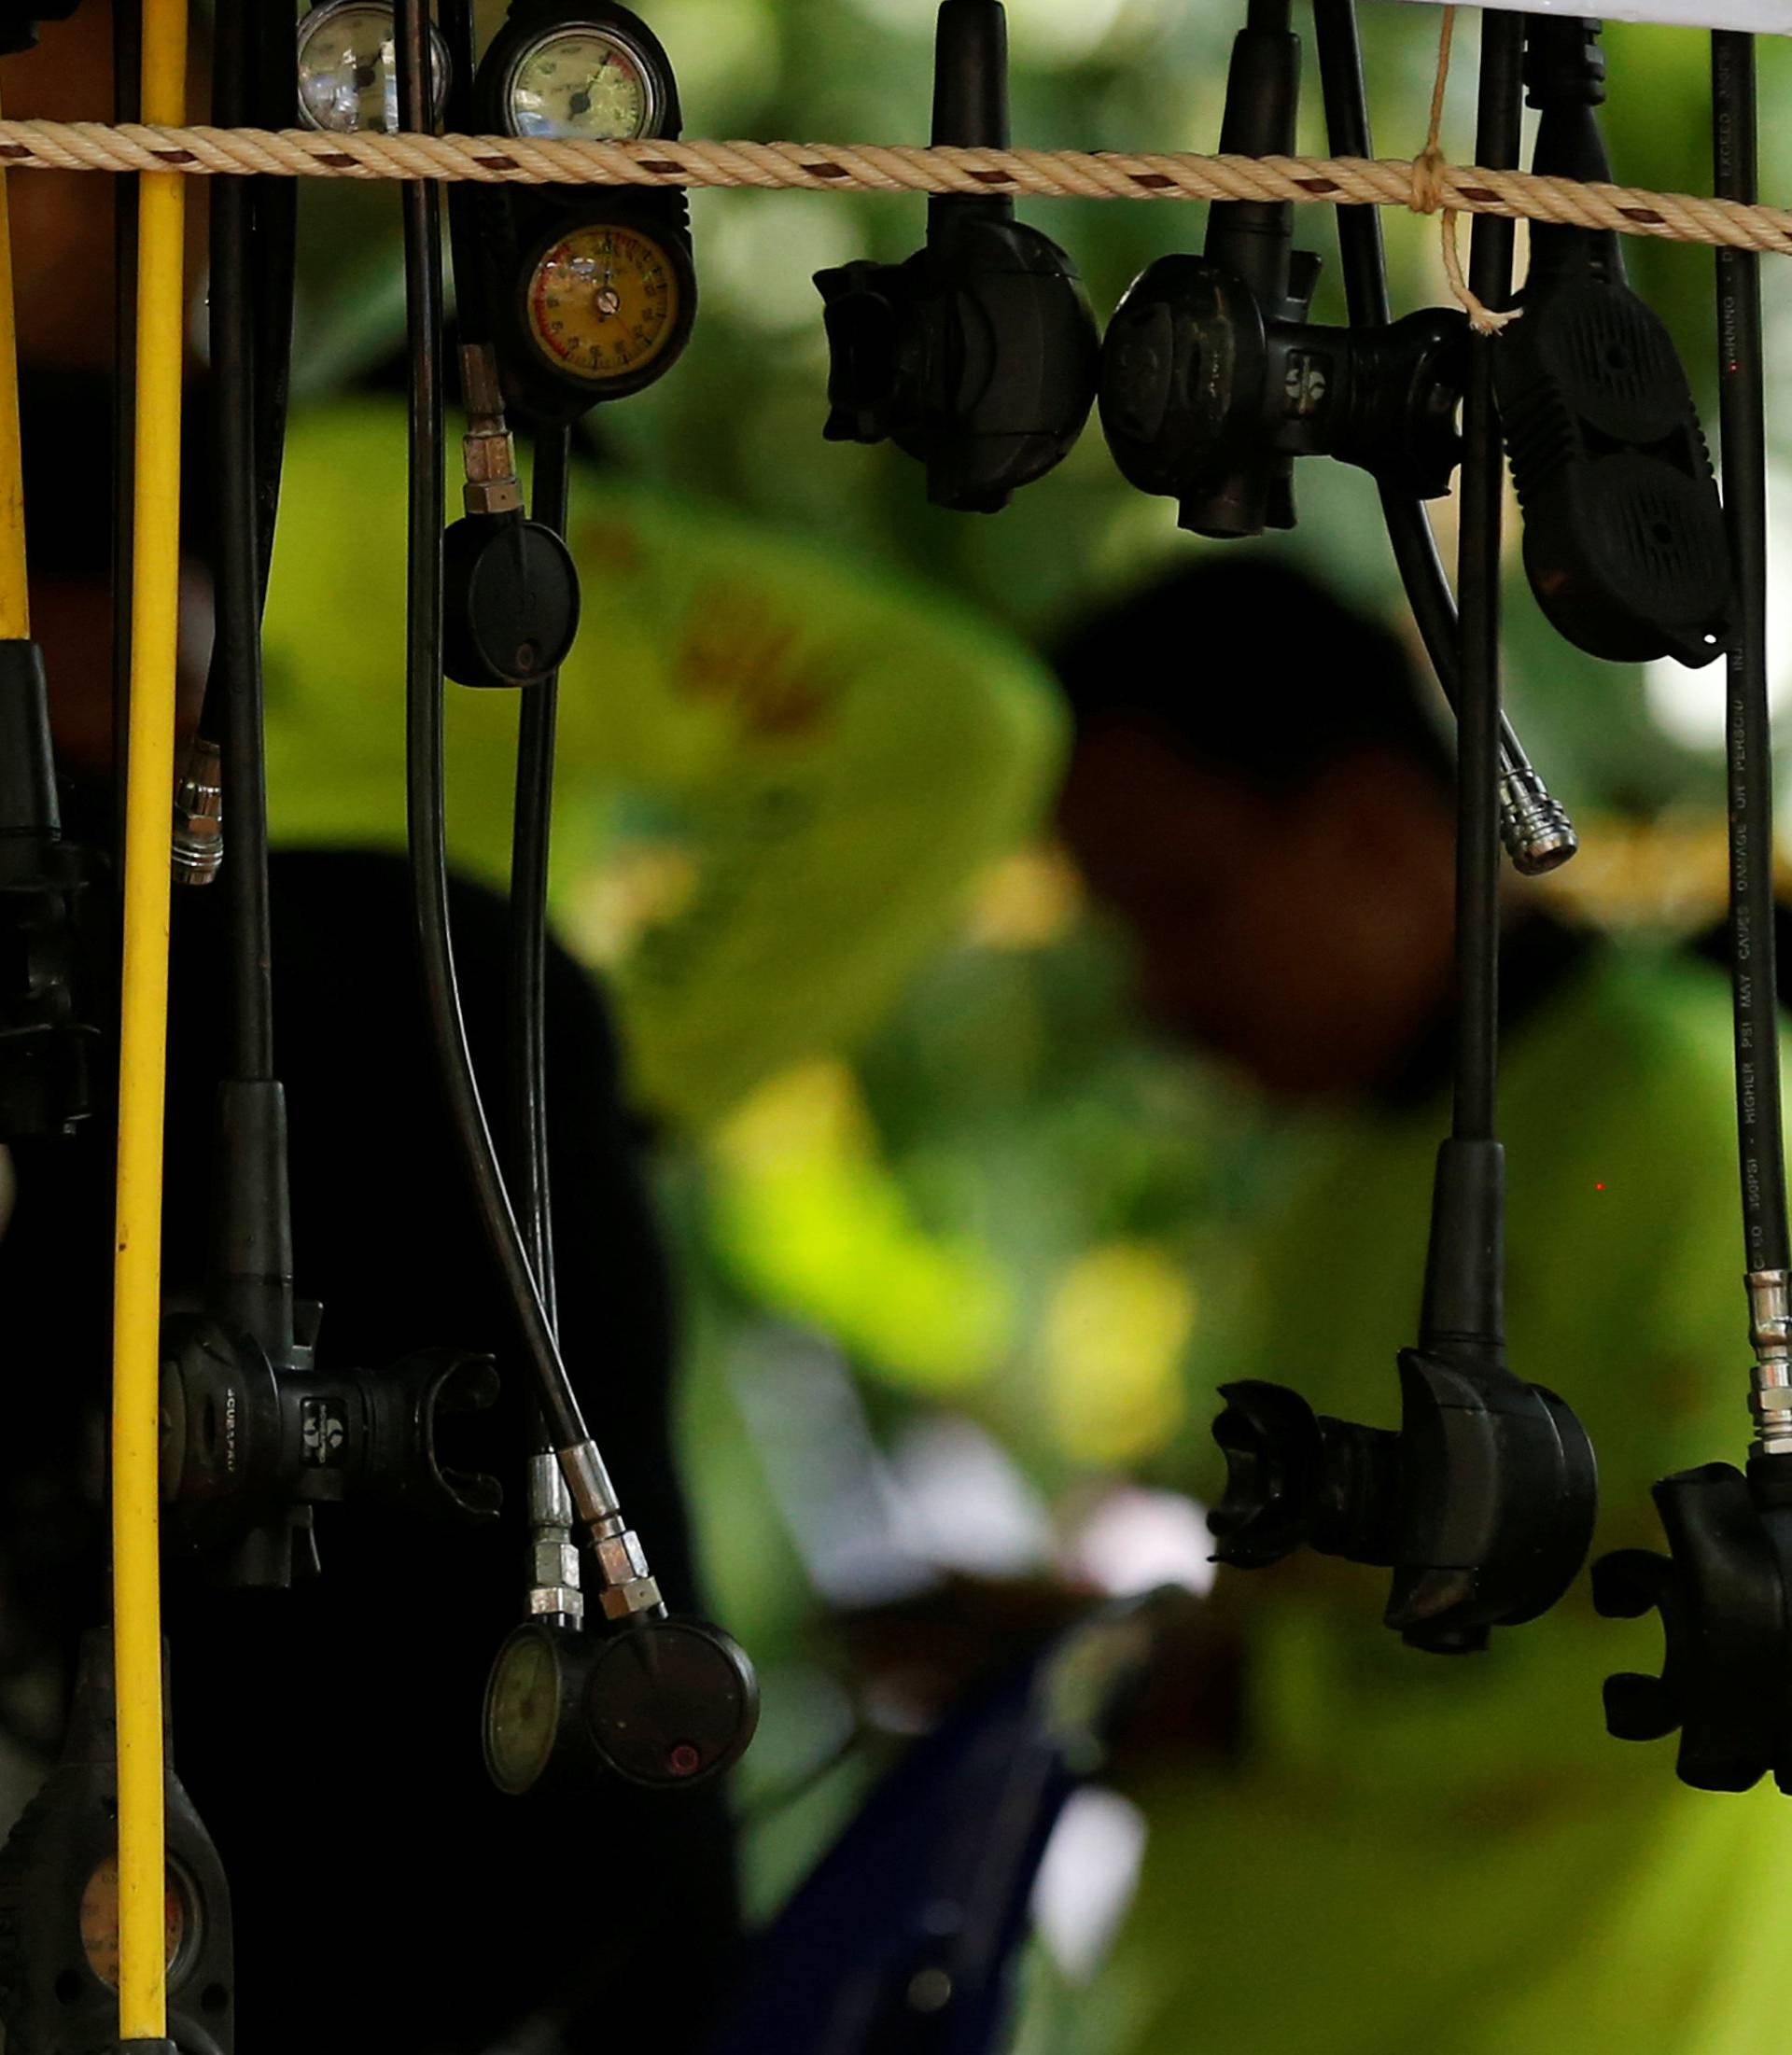 Divers equipment is seen near Tham Luang cave complex, as an ongoing search for members of an under-16 soccer team and their coach continues, in the northern province of Chiang Rai